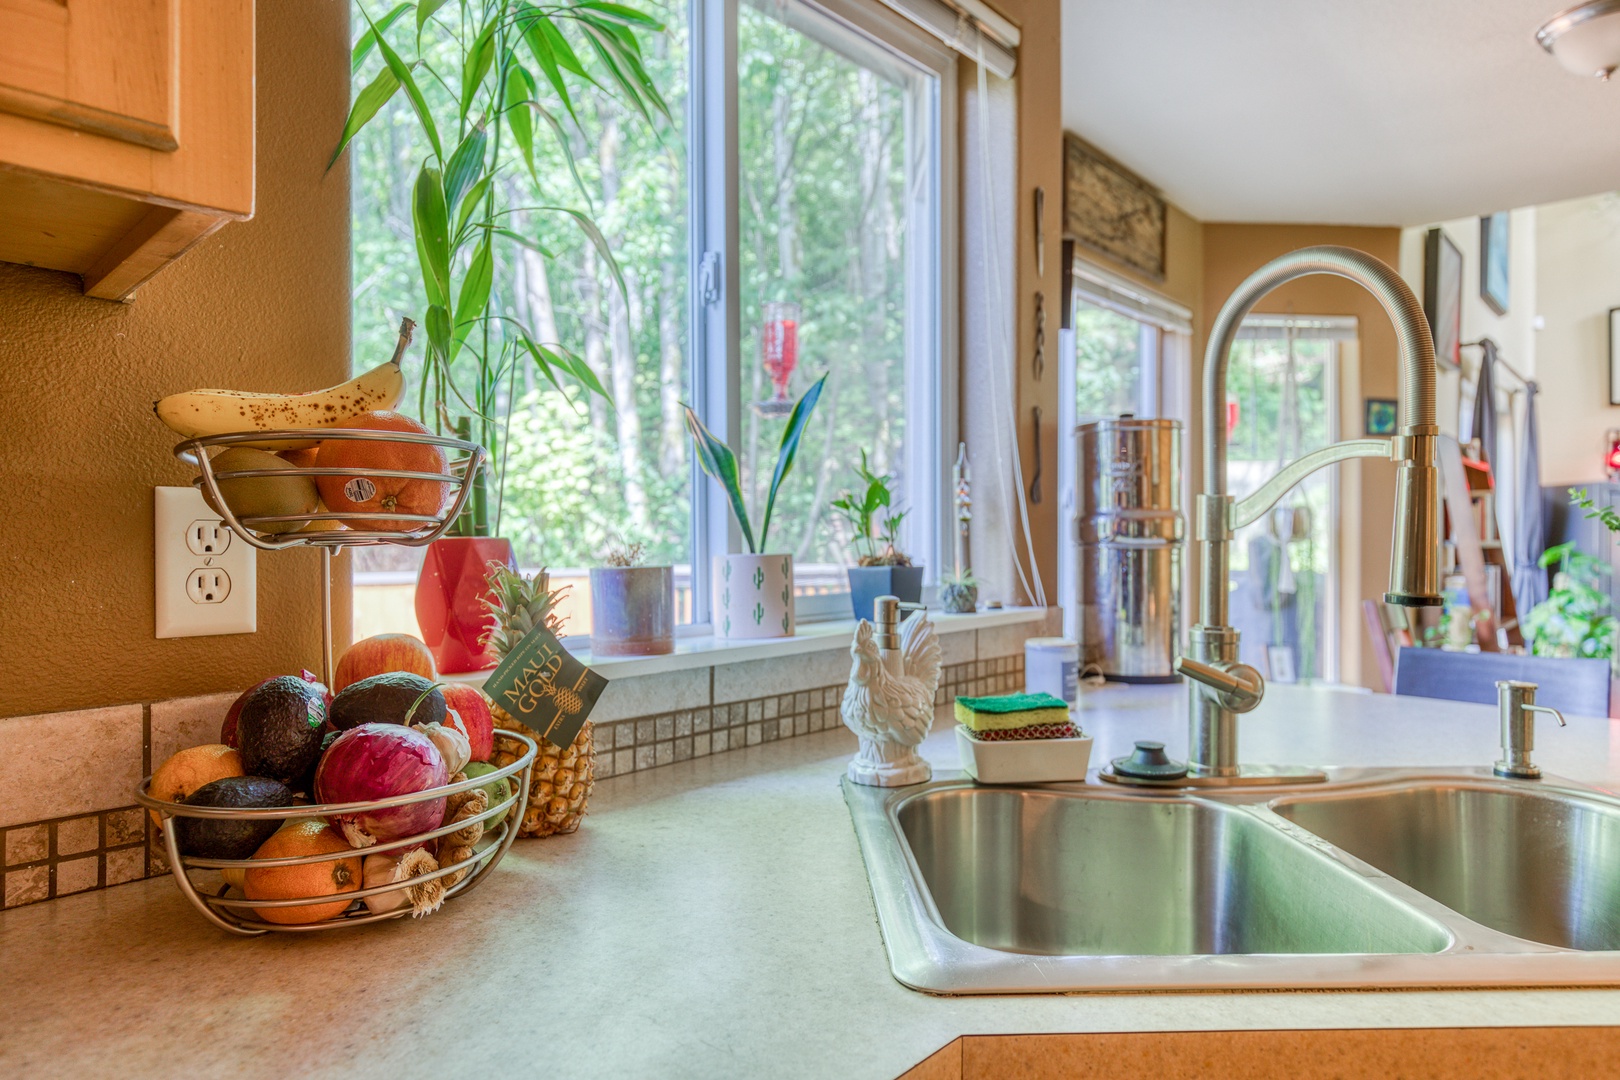 Clackamas Vacation Rentals, Duck Crossing - The large, double-basin sink has views to the patio